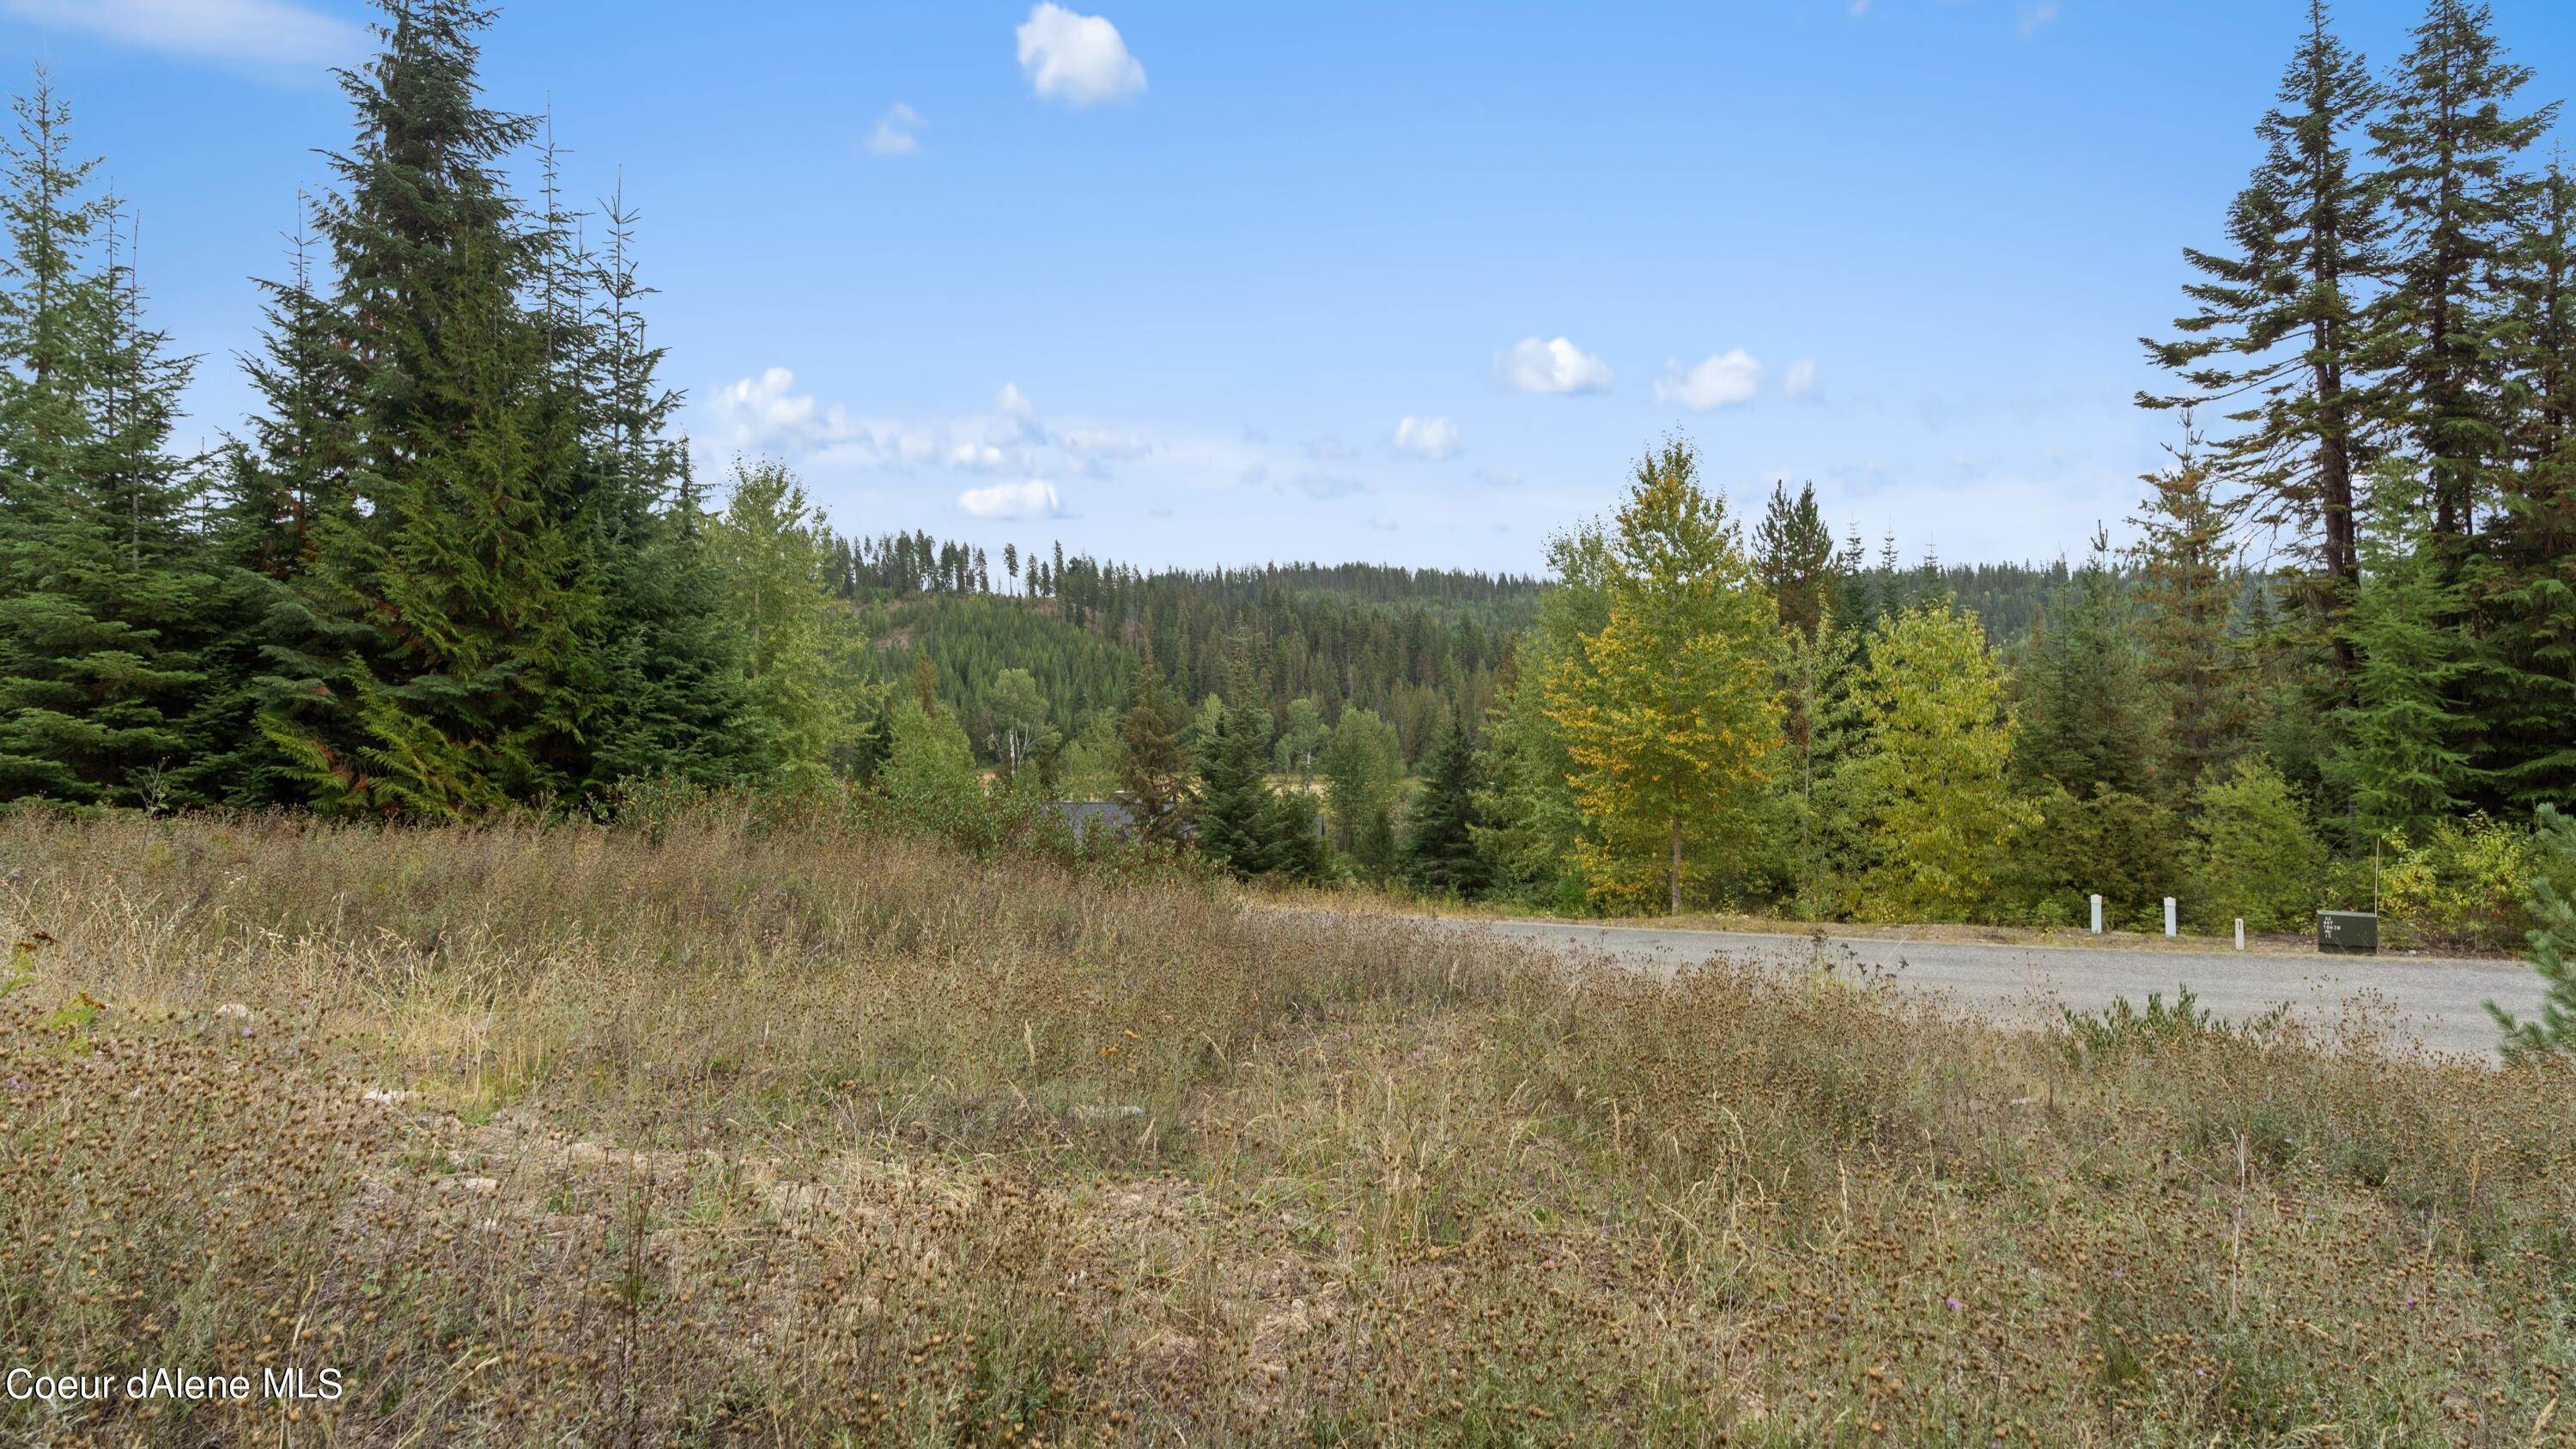 7. Land for Sale at Blk 13 Lots 1&2 Long Drive Priest Lake, Idaho 83856 United States